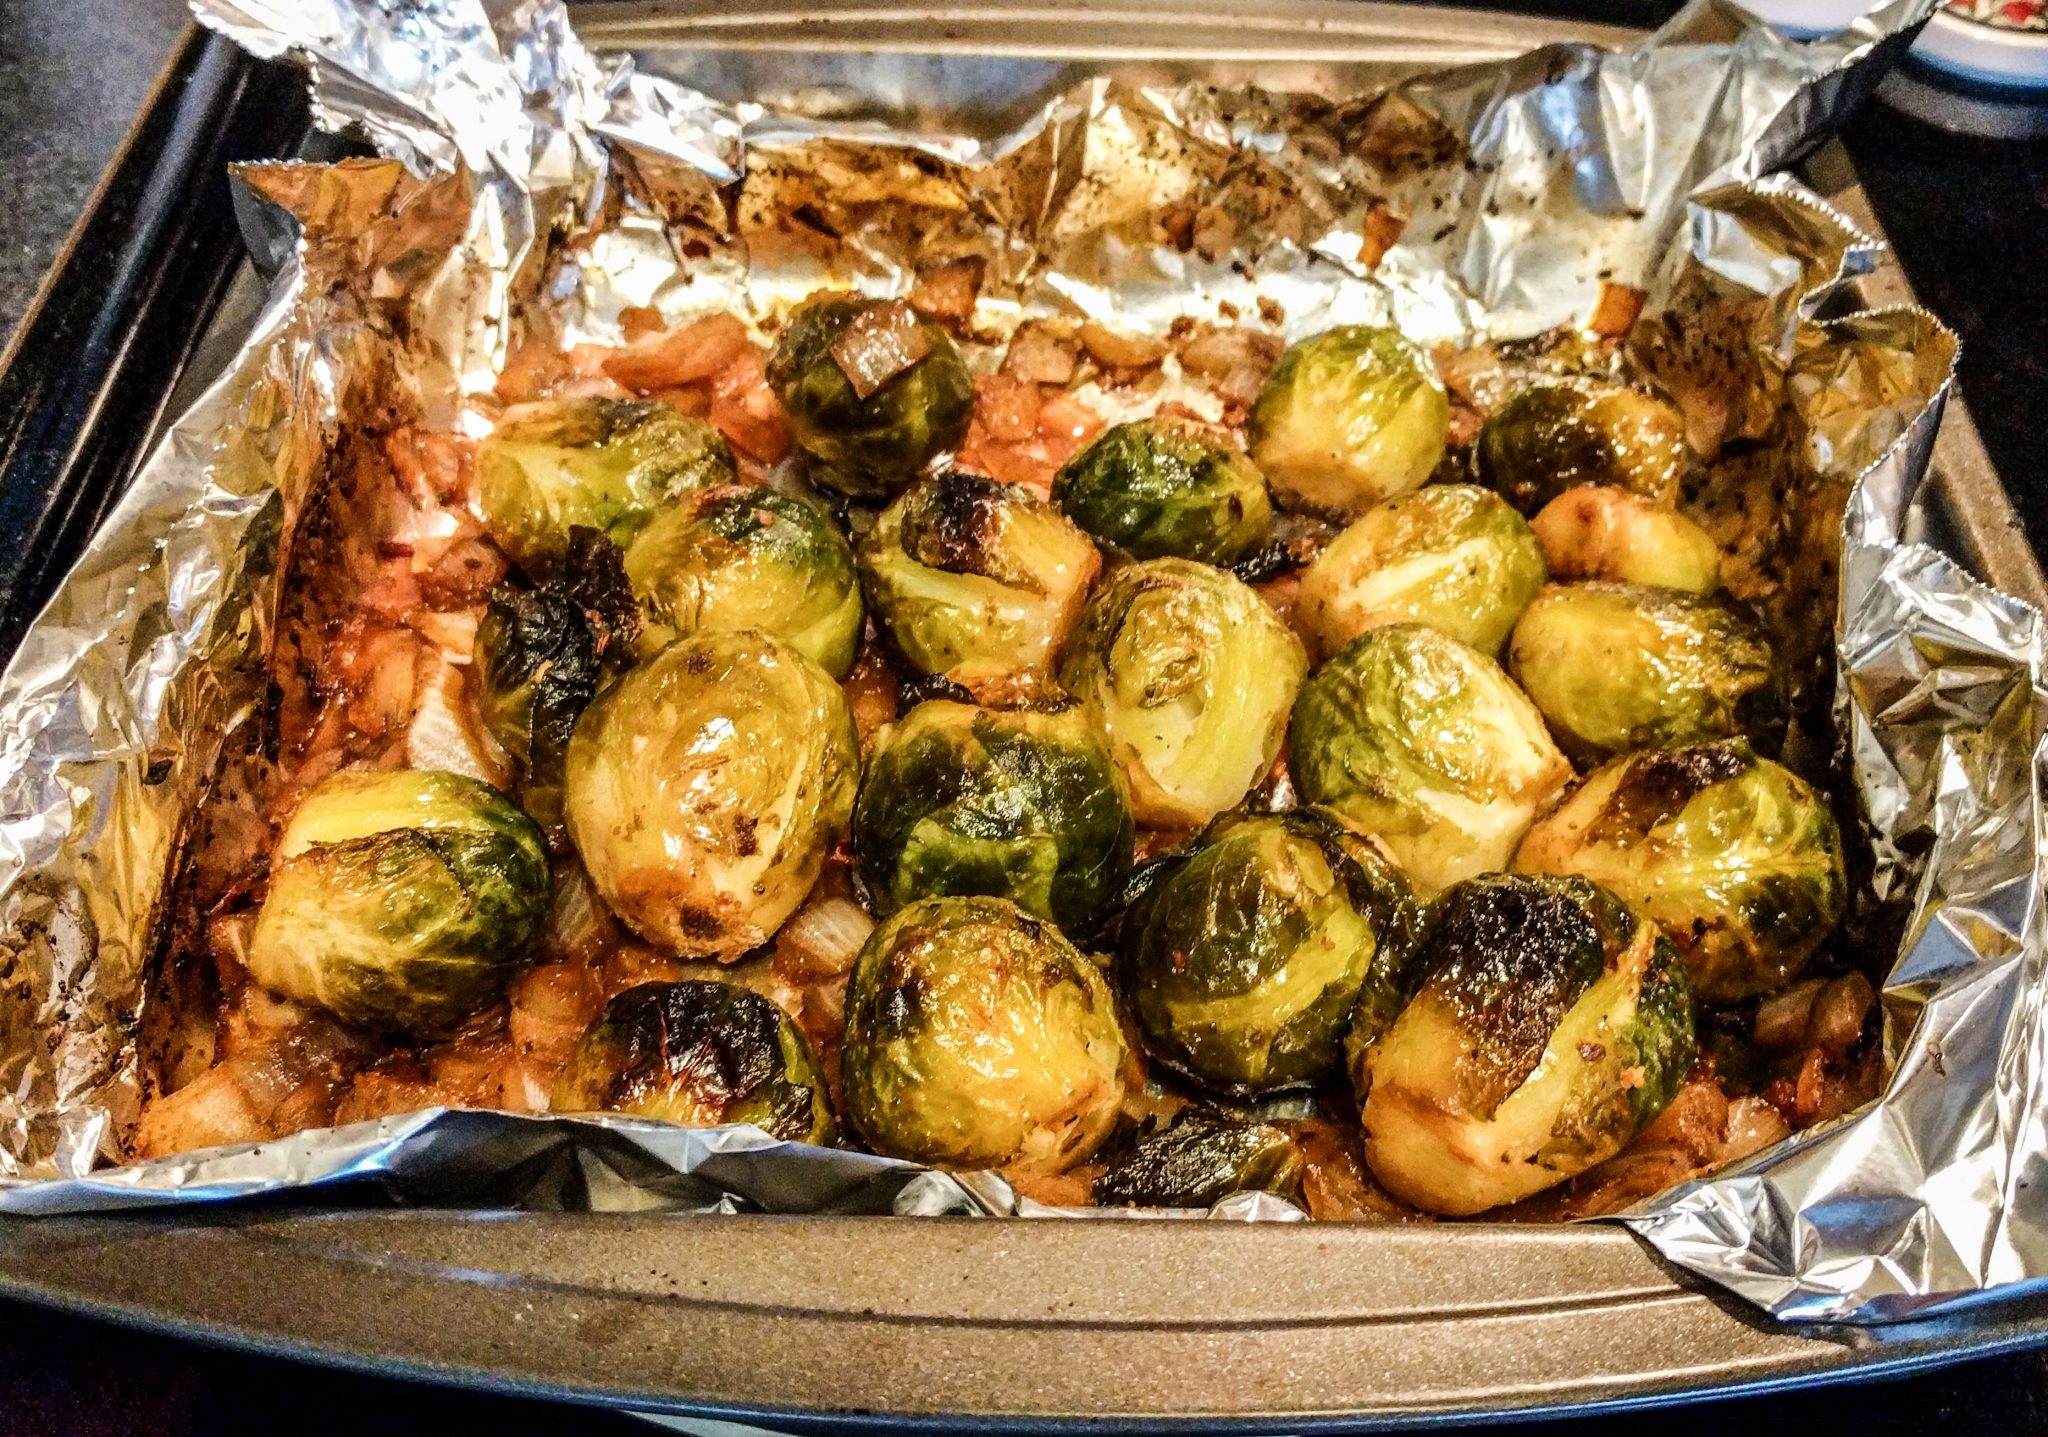 Brussel Sprouts baked in vinegar